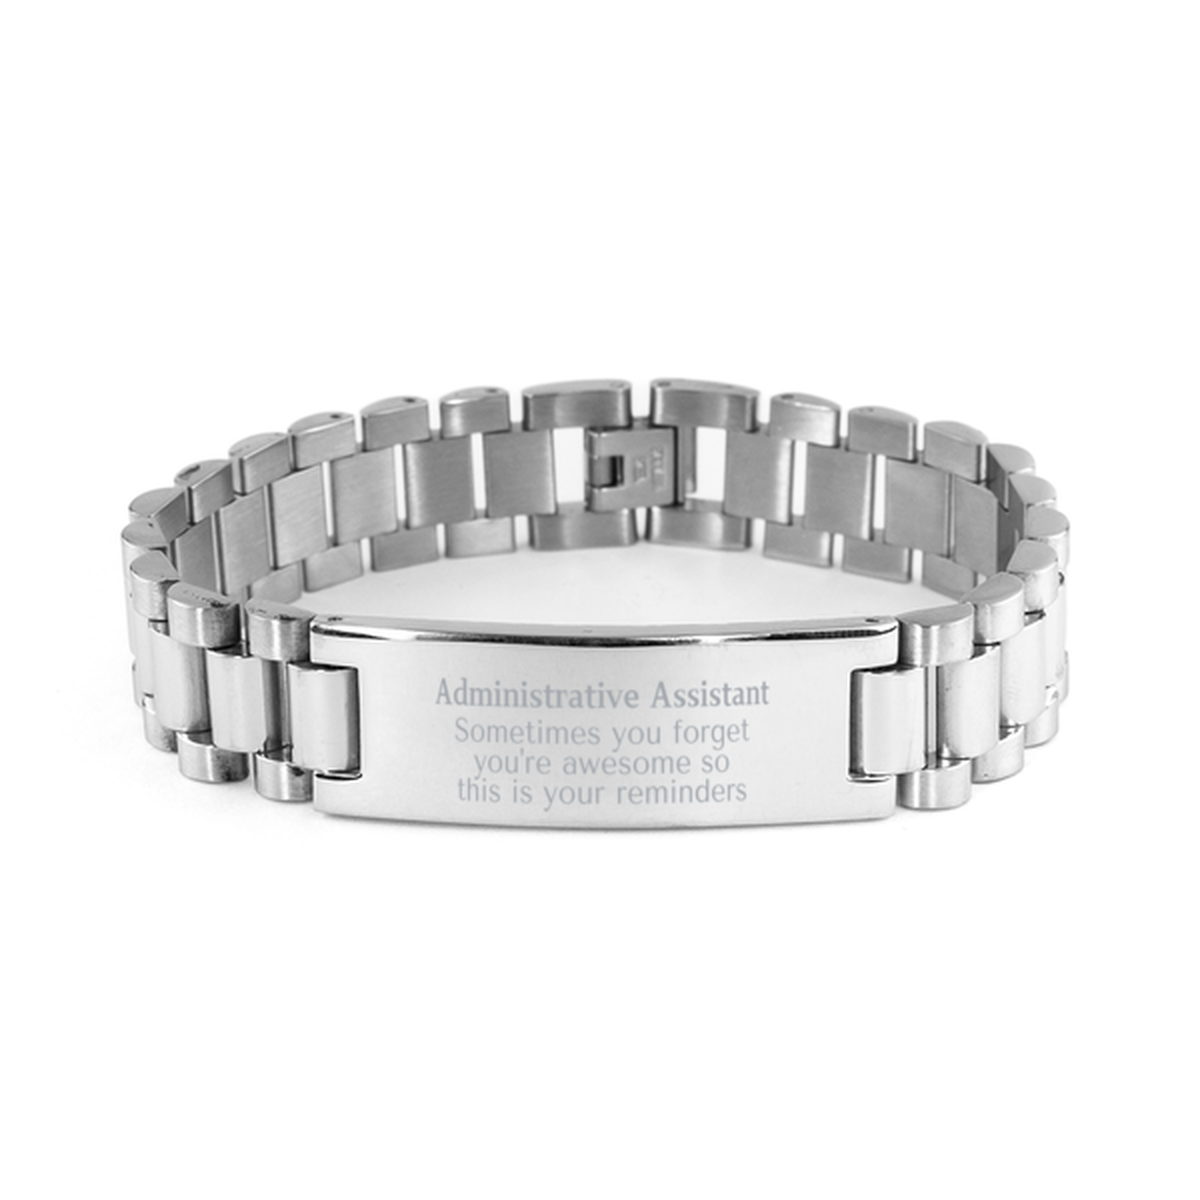 Sentimental Administrative Assistant Ladder Stainless Steel Bracelet, Administrative Assistant Sometimes you forget you're awesome so this is your reminders, Graduation Christmas Birthday Gifts for Administrative Assistant, Men, Women, Coworkers